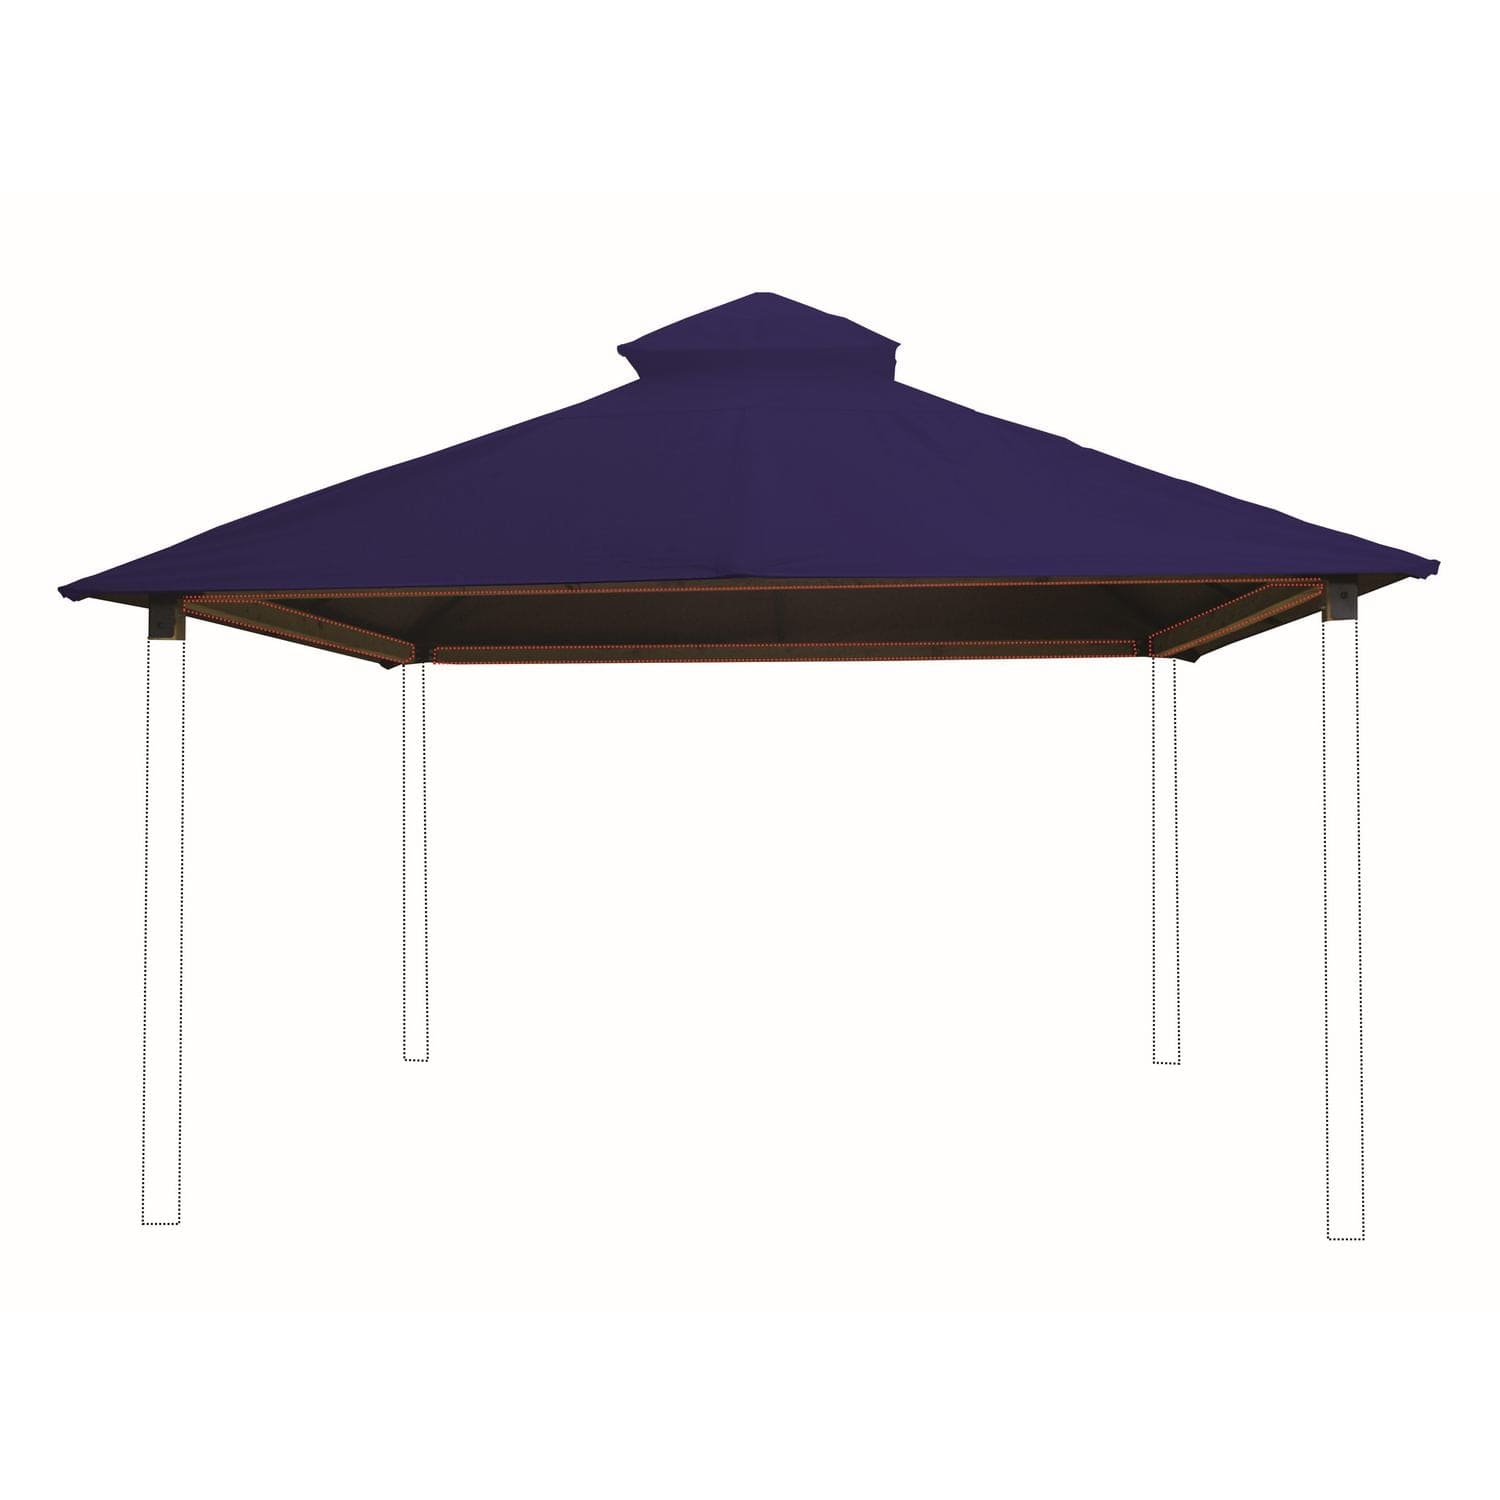 Riverstone Industries Soft Top Gazebos 12FT X 12FT Riverstone | ACACIA Gazebo Roof Framing and Mounting Kit With OutDURA Canopy - Pacific Blue AGOK12-PACIFIC-BLUE